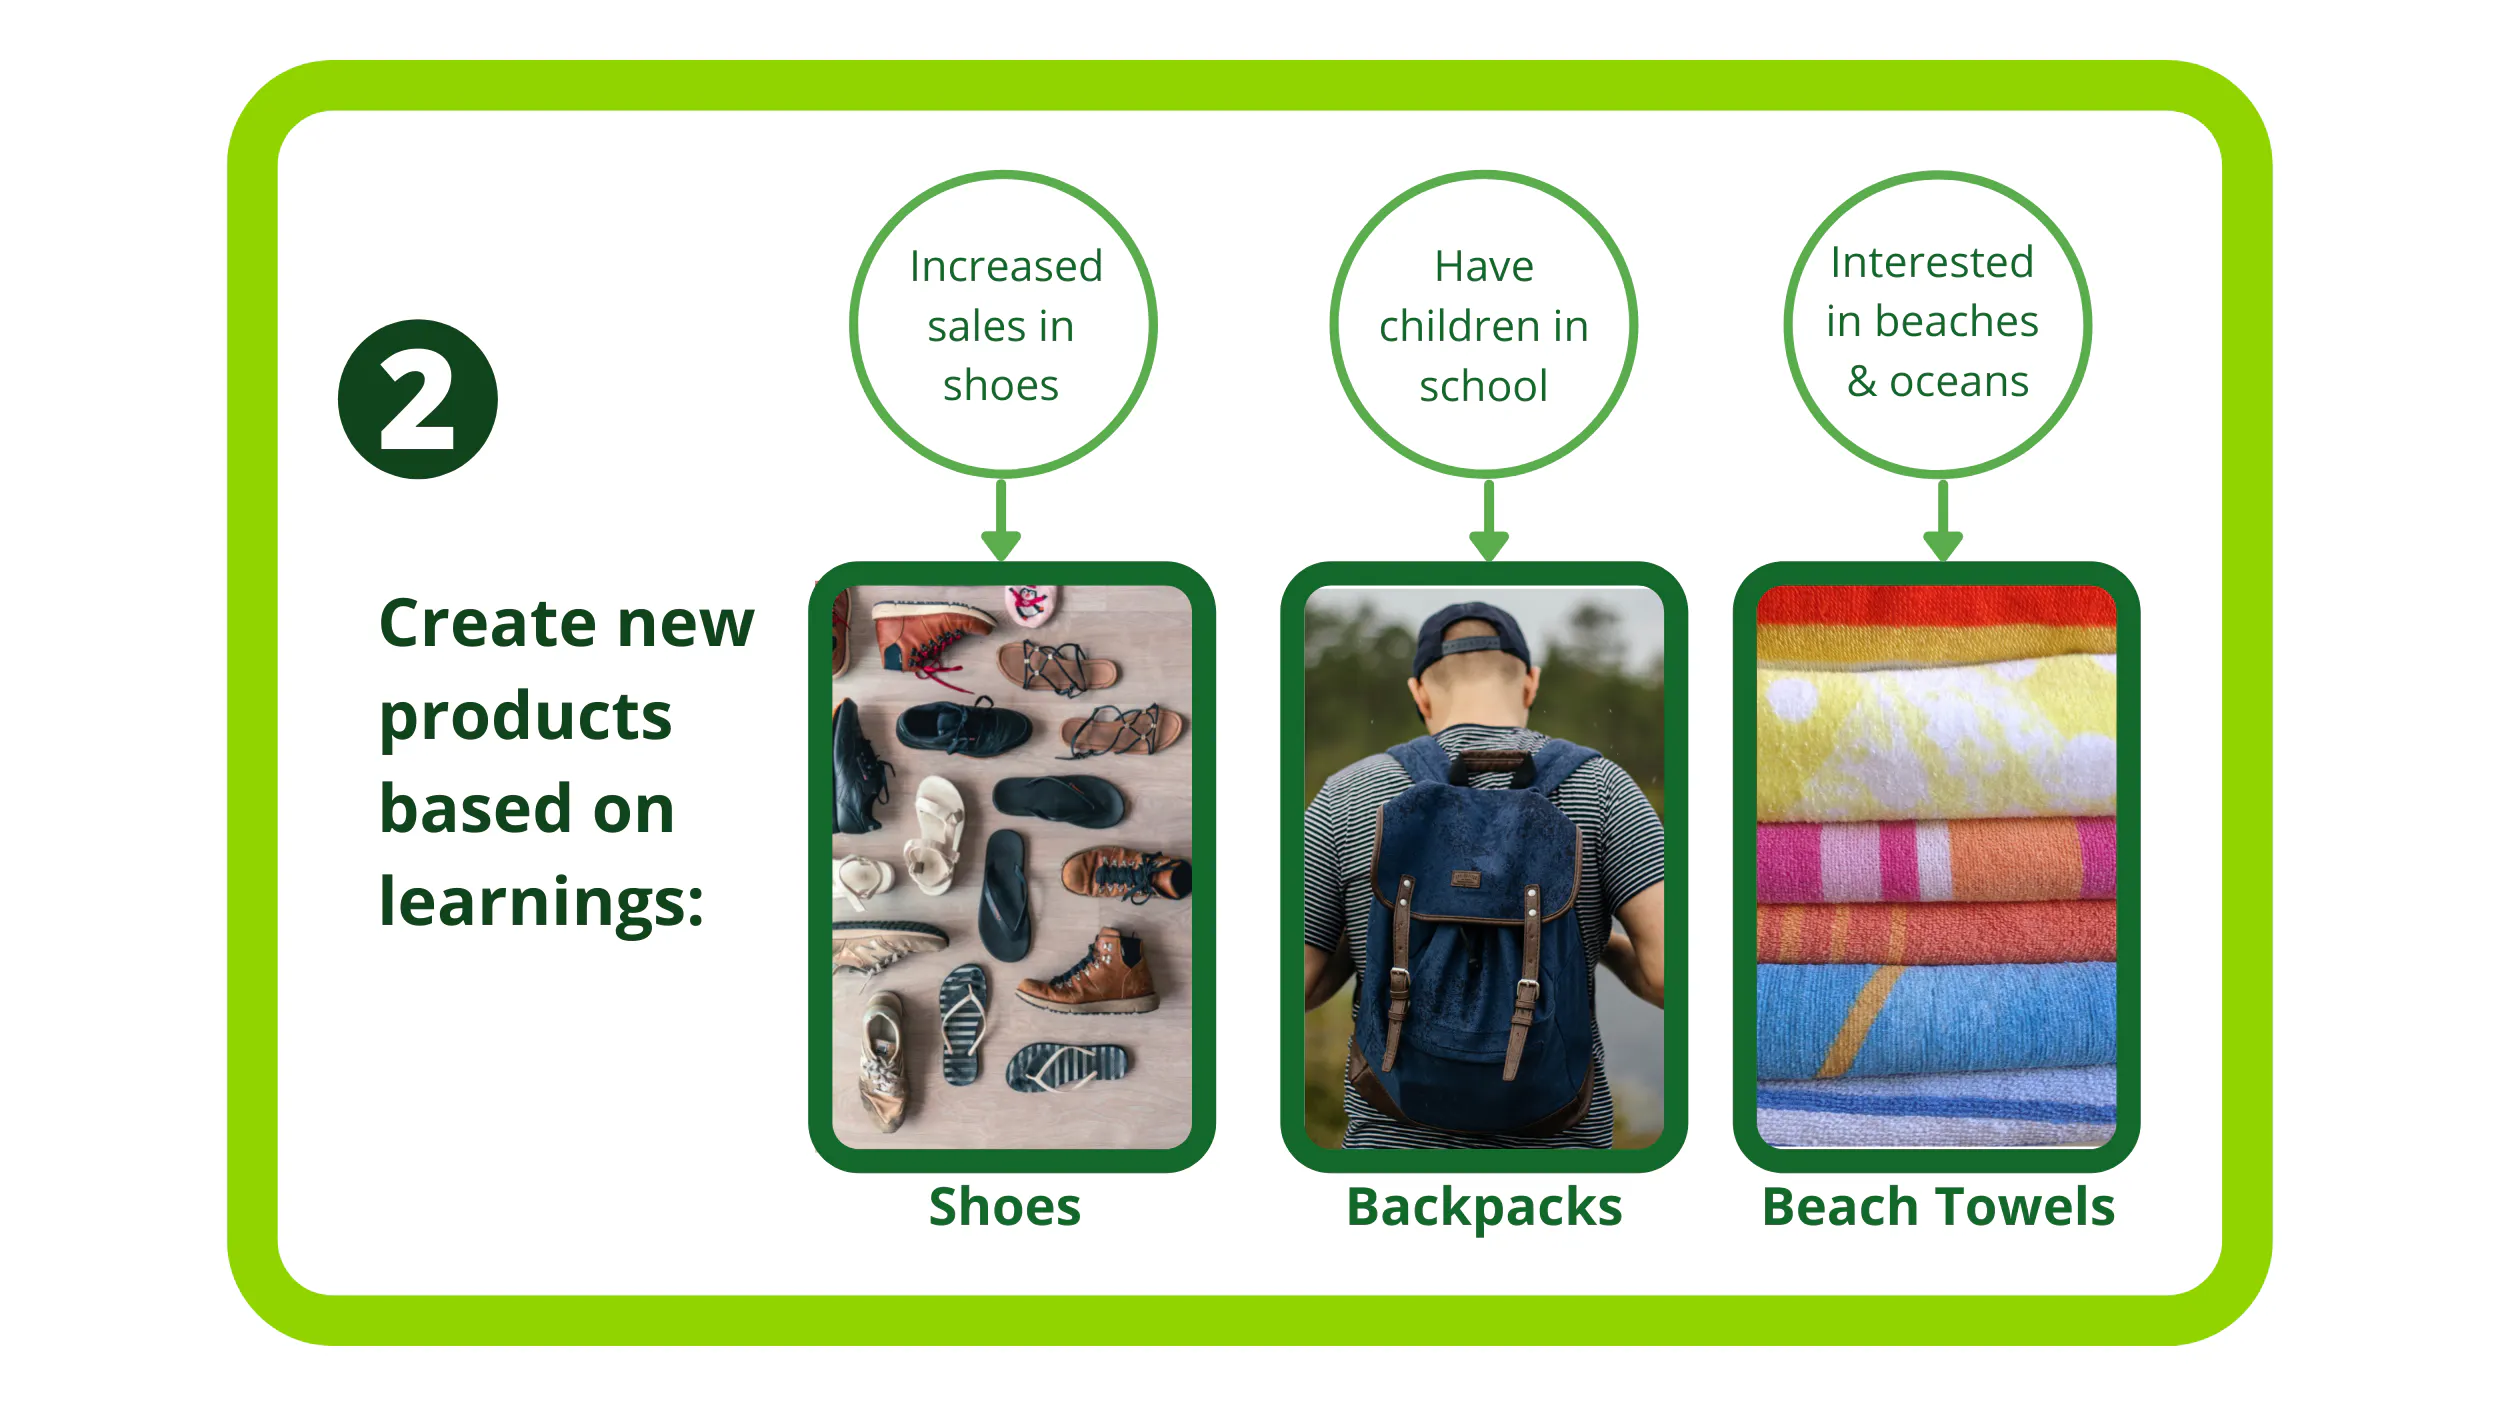 Create new products based on learnings from shoes, backpacks and beach towels